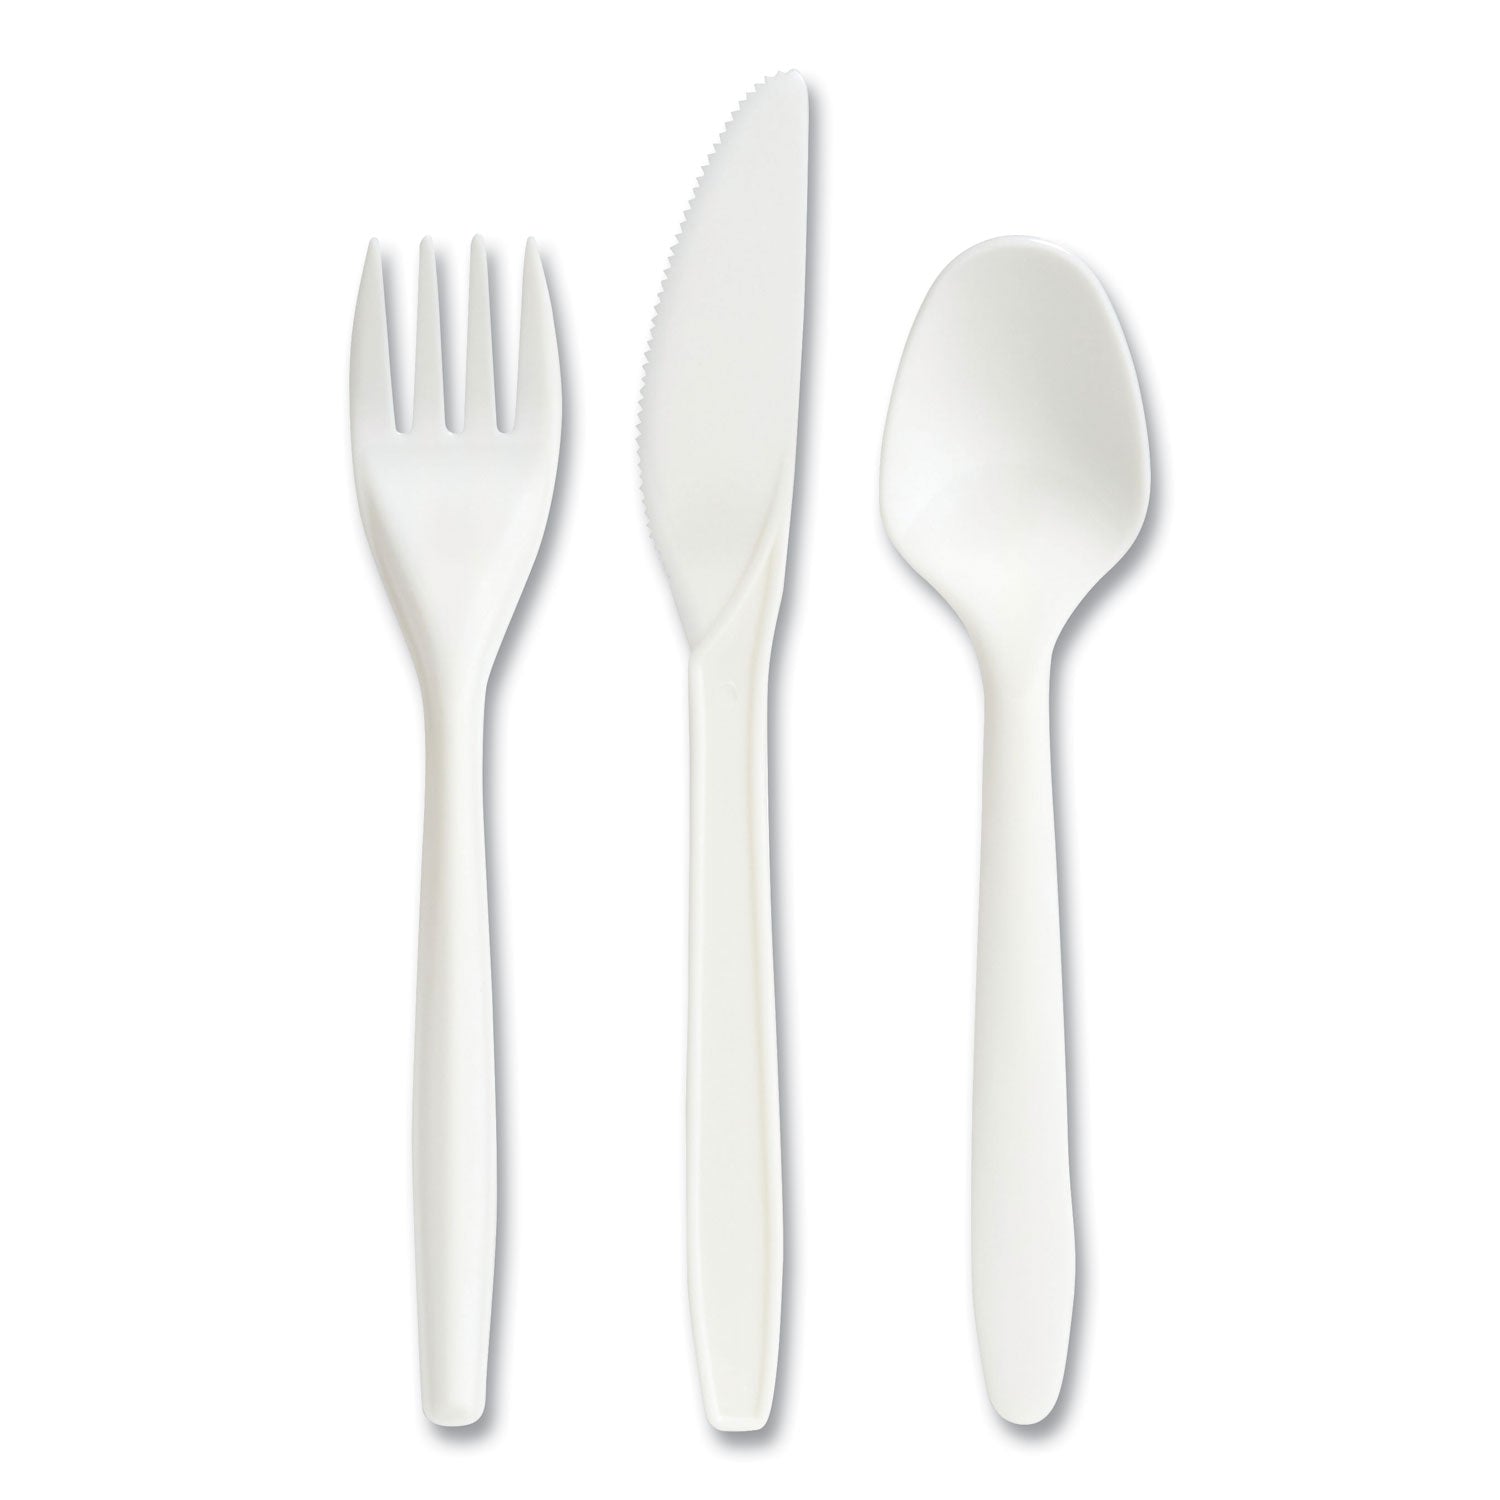 eco-id-mediumweight-compostable-cutlery-fork-knife-teaspoon-white-120-sets-pack_prk24394124 - 1